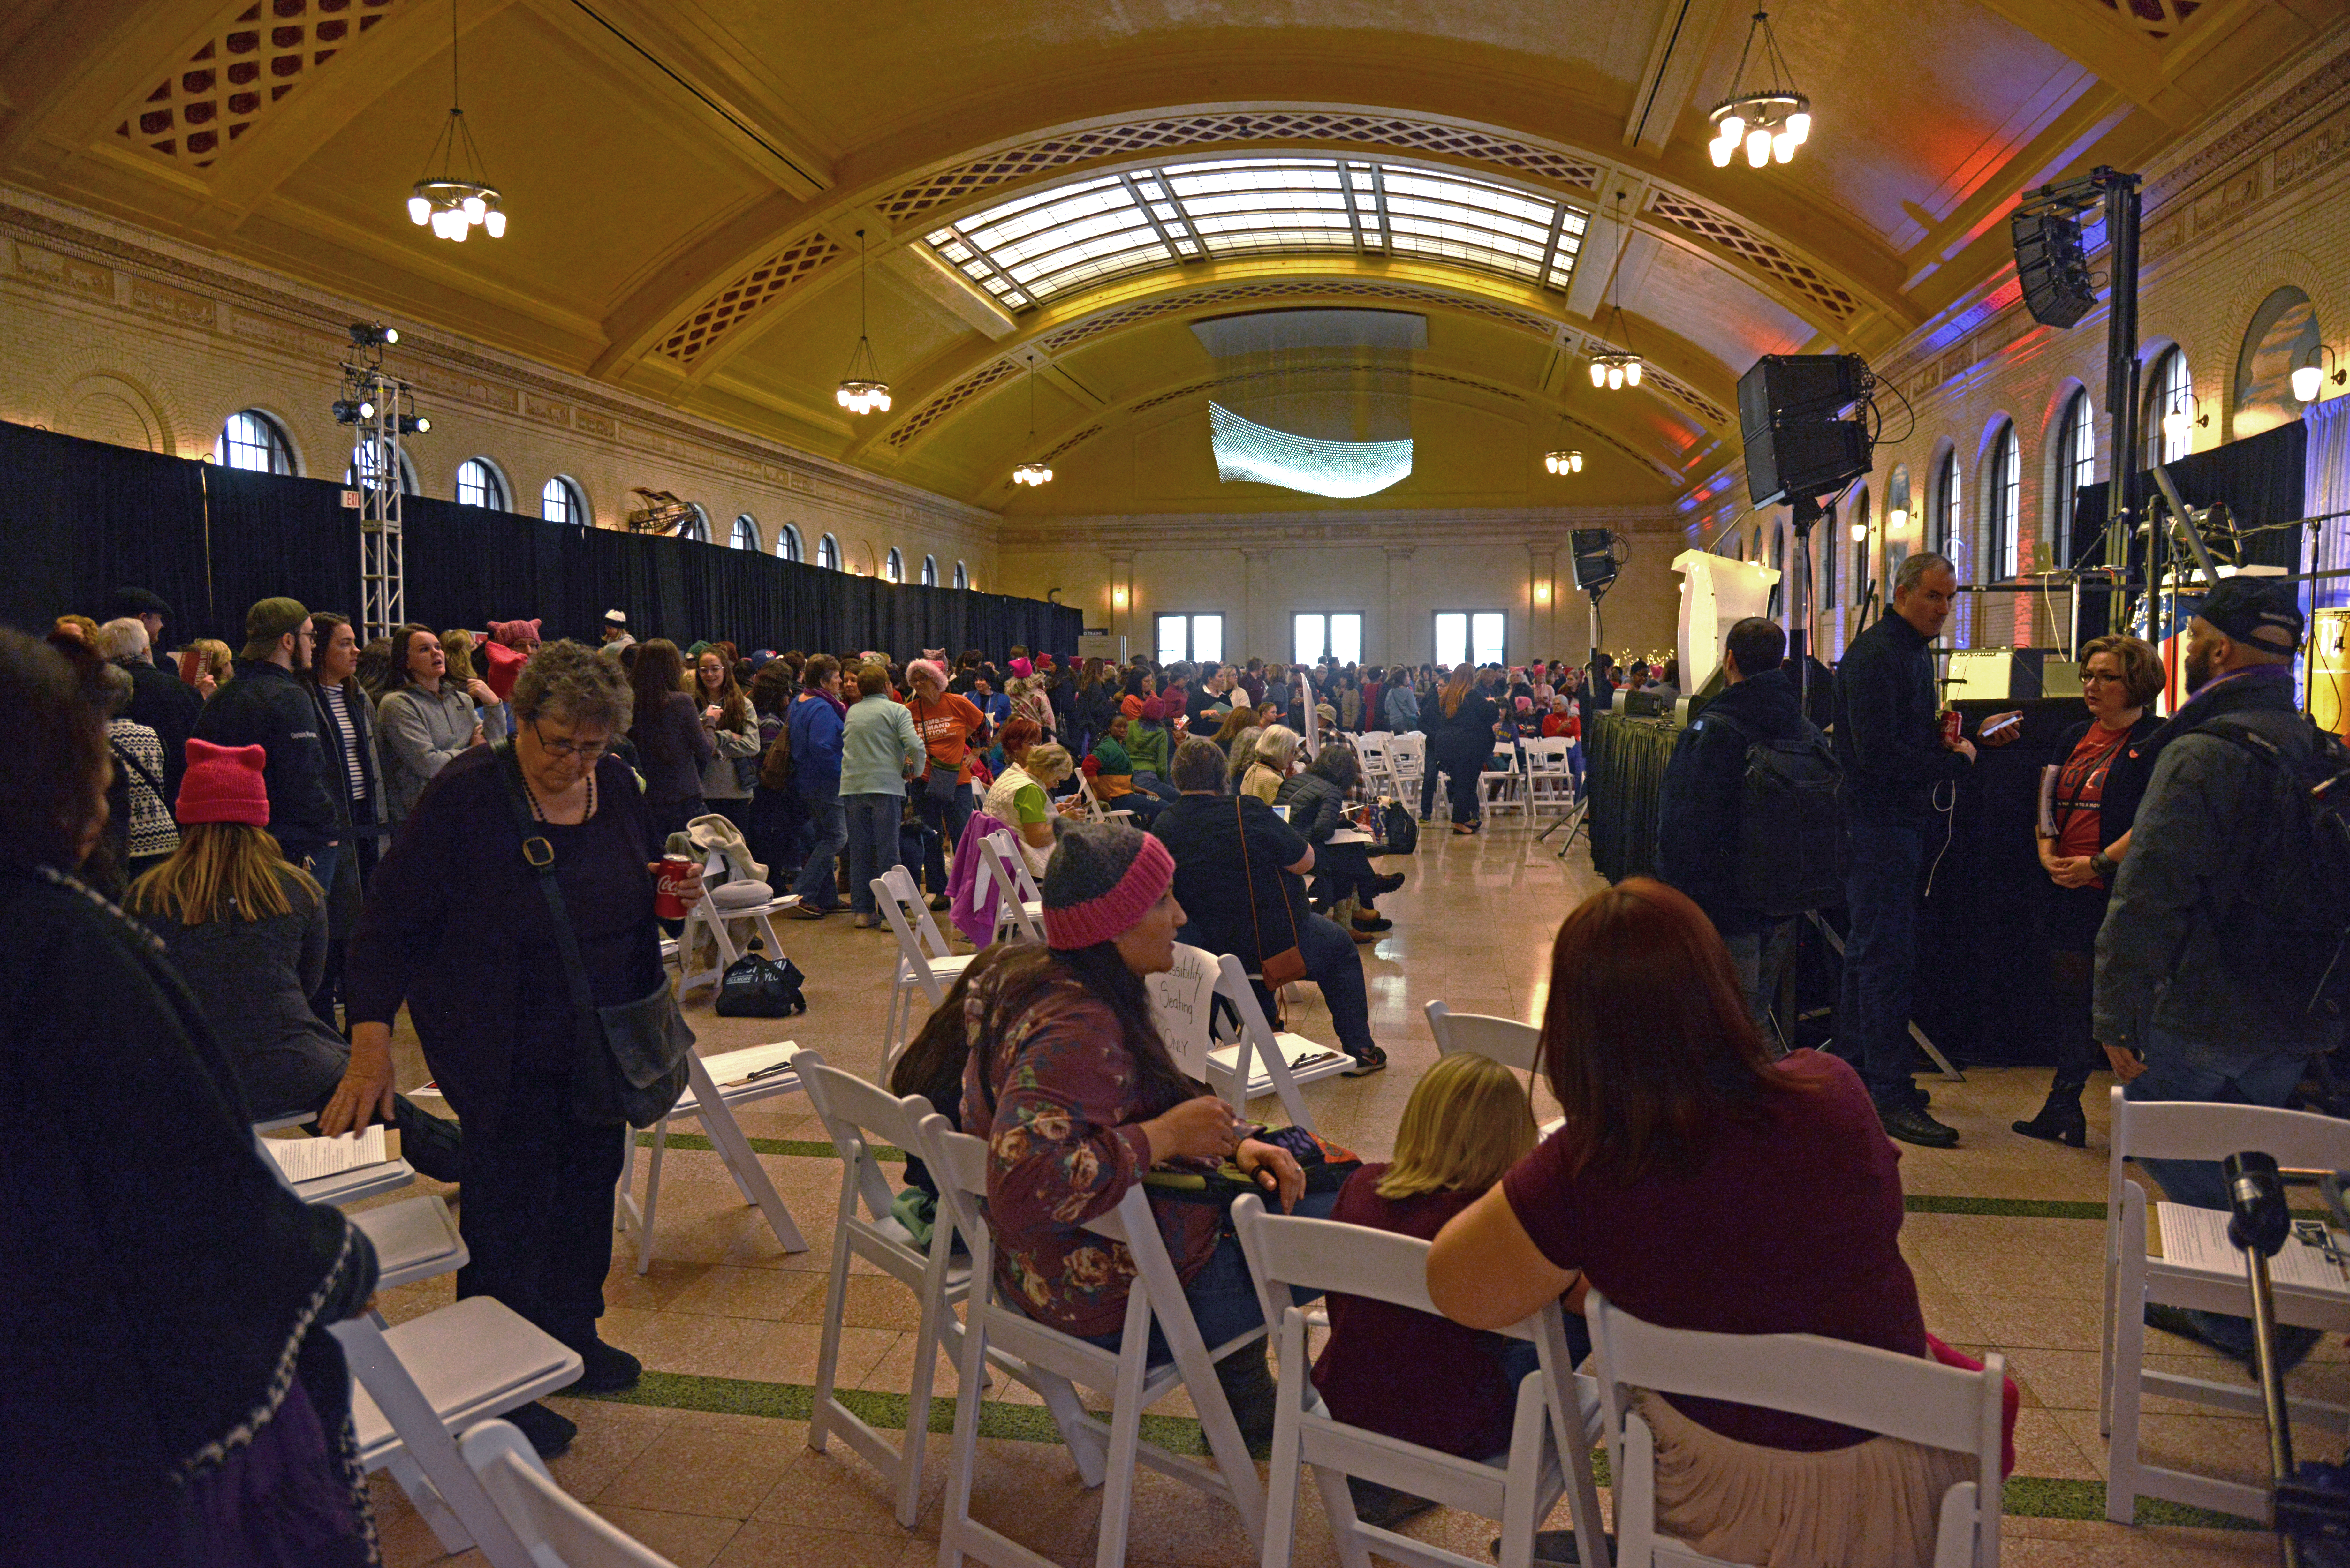 People from all over Minnesota gathered to attend the Hear Our Voice Womens March event at the Union Depot in St. Paul on Sunday, Jan. 21, 2018.